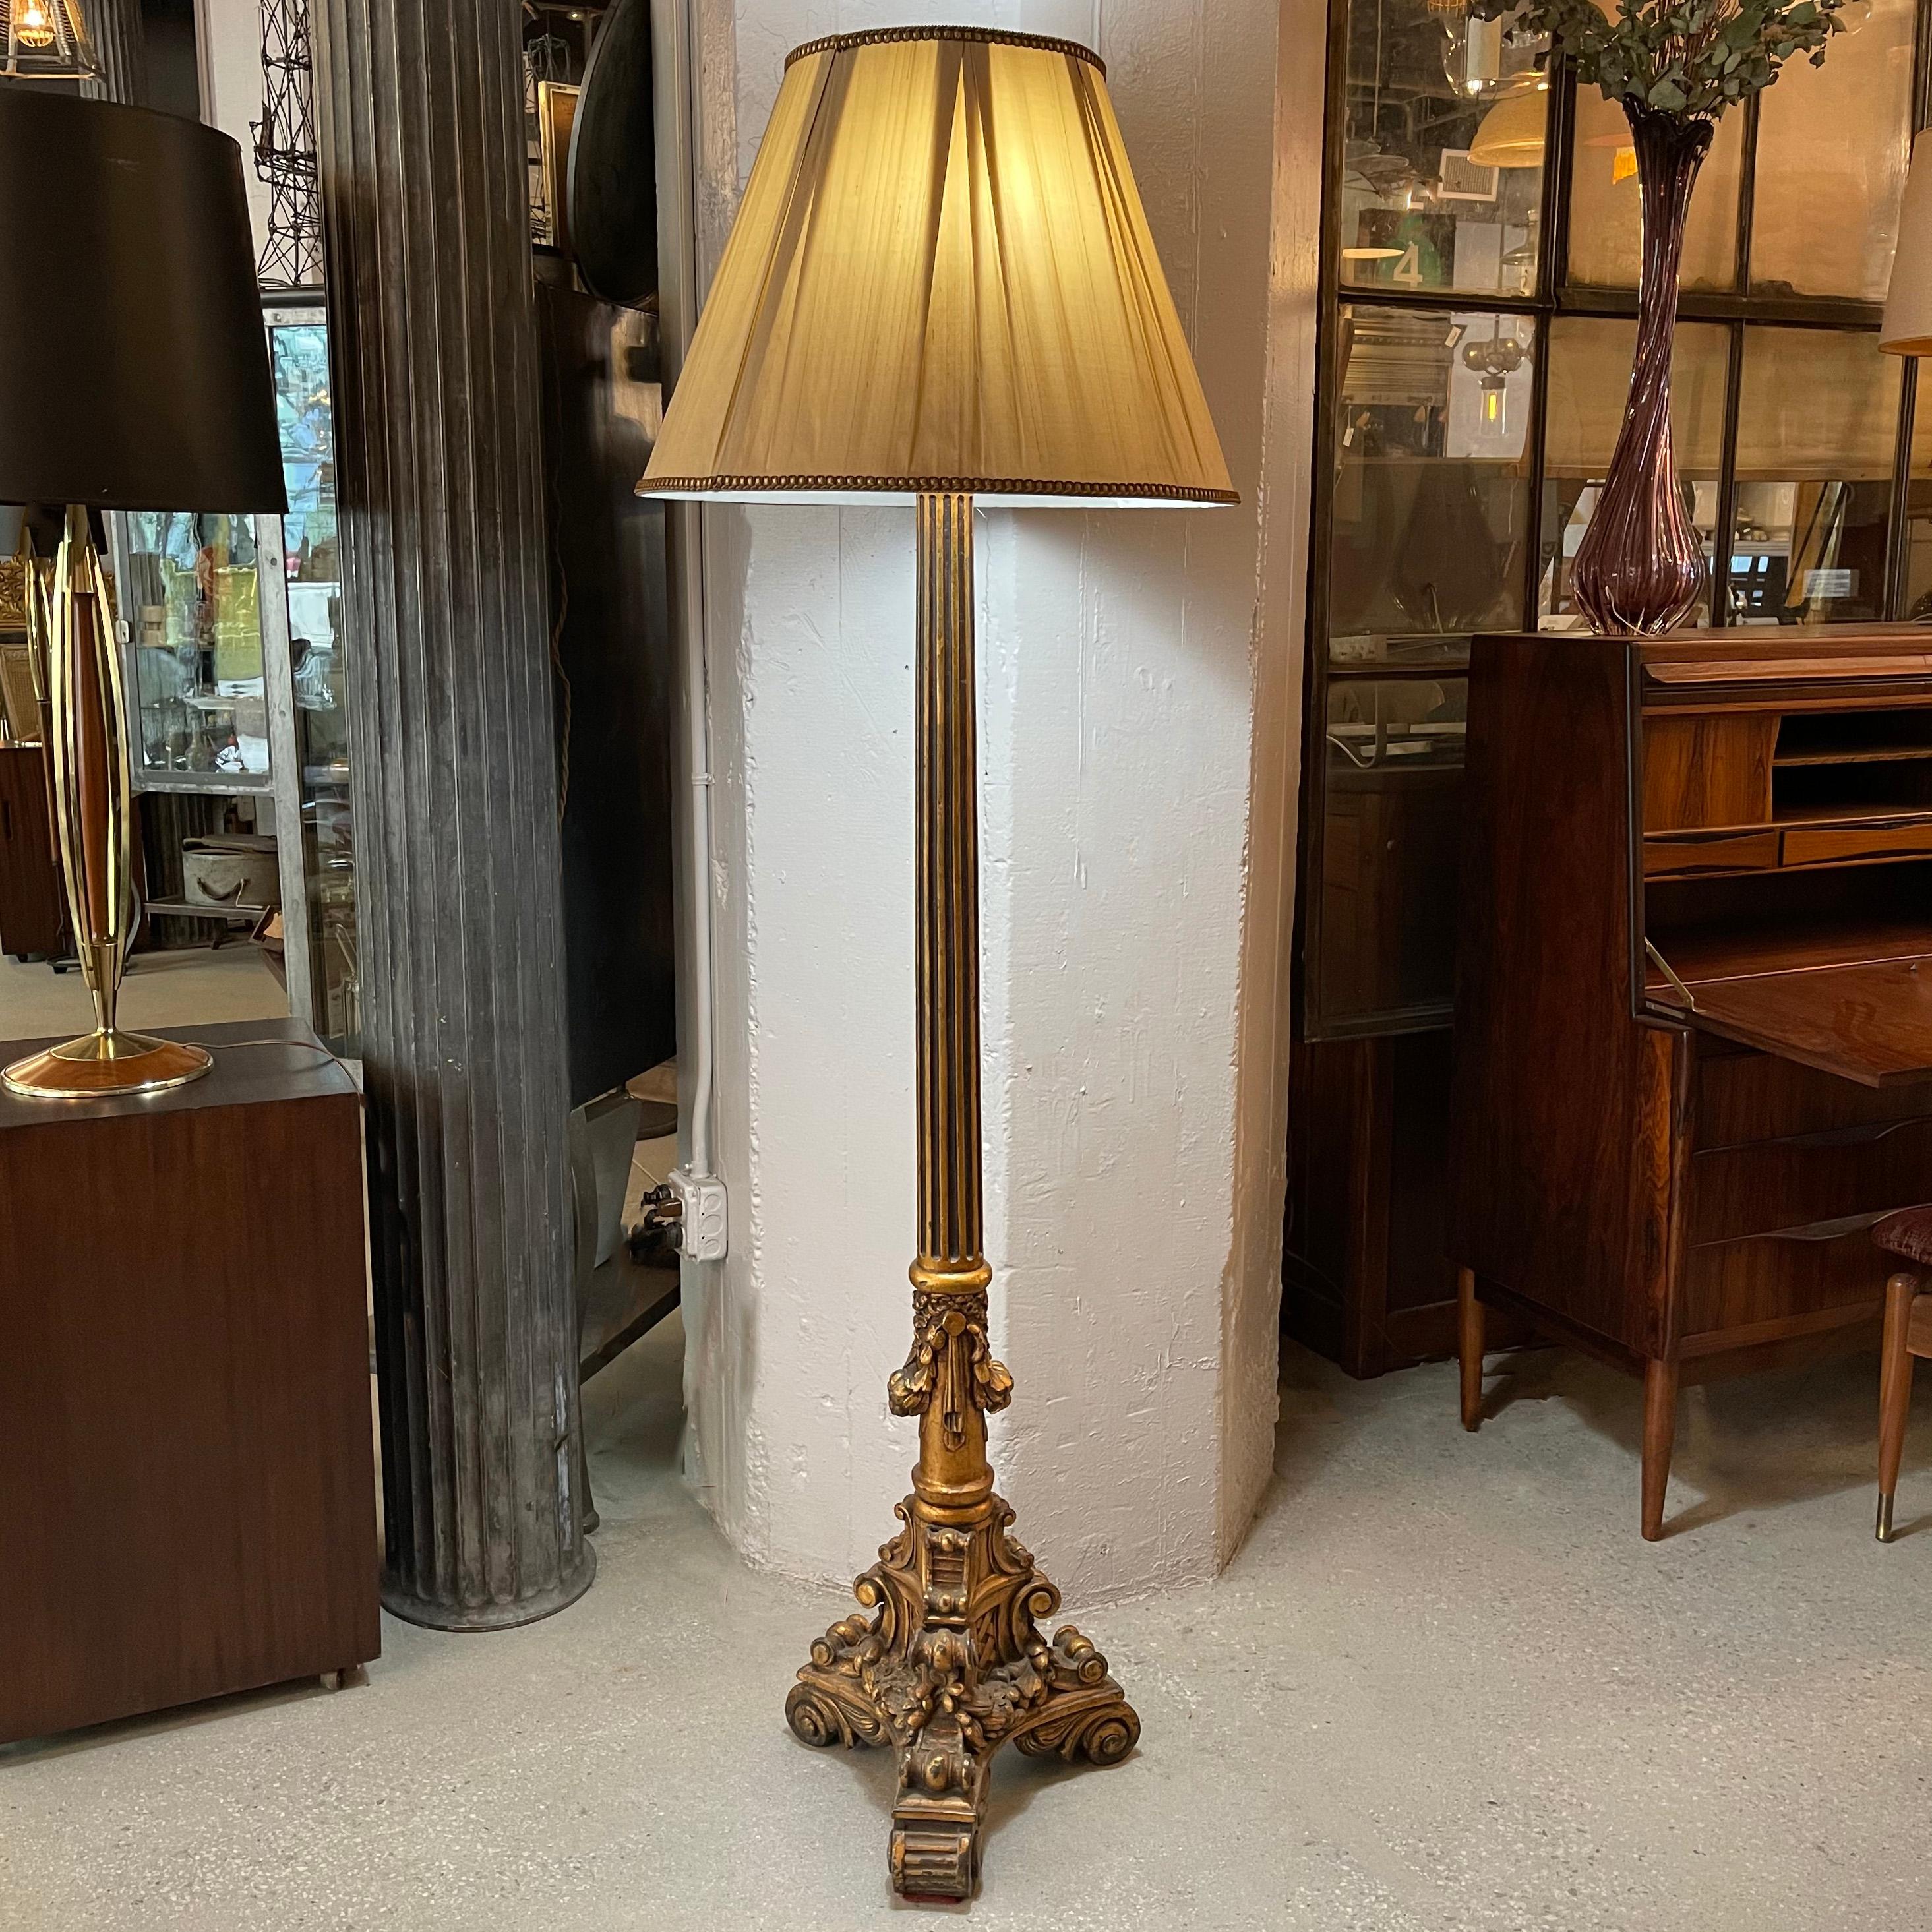 Tall, ornate, intricately carved, gilt, composite floor lamp with fluted stem in the Baroque style with vintage, pinch pleat, fabric shade.